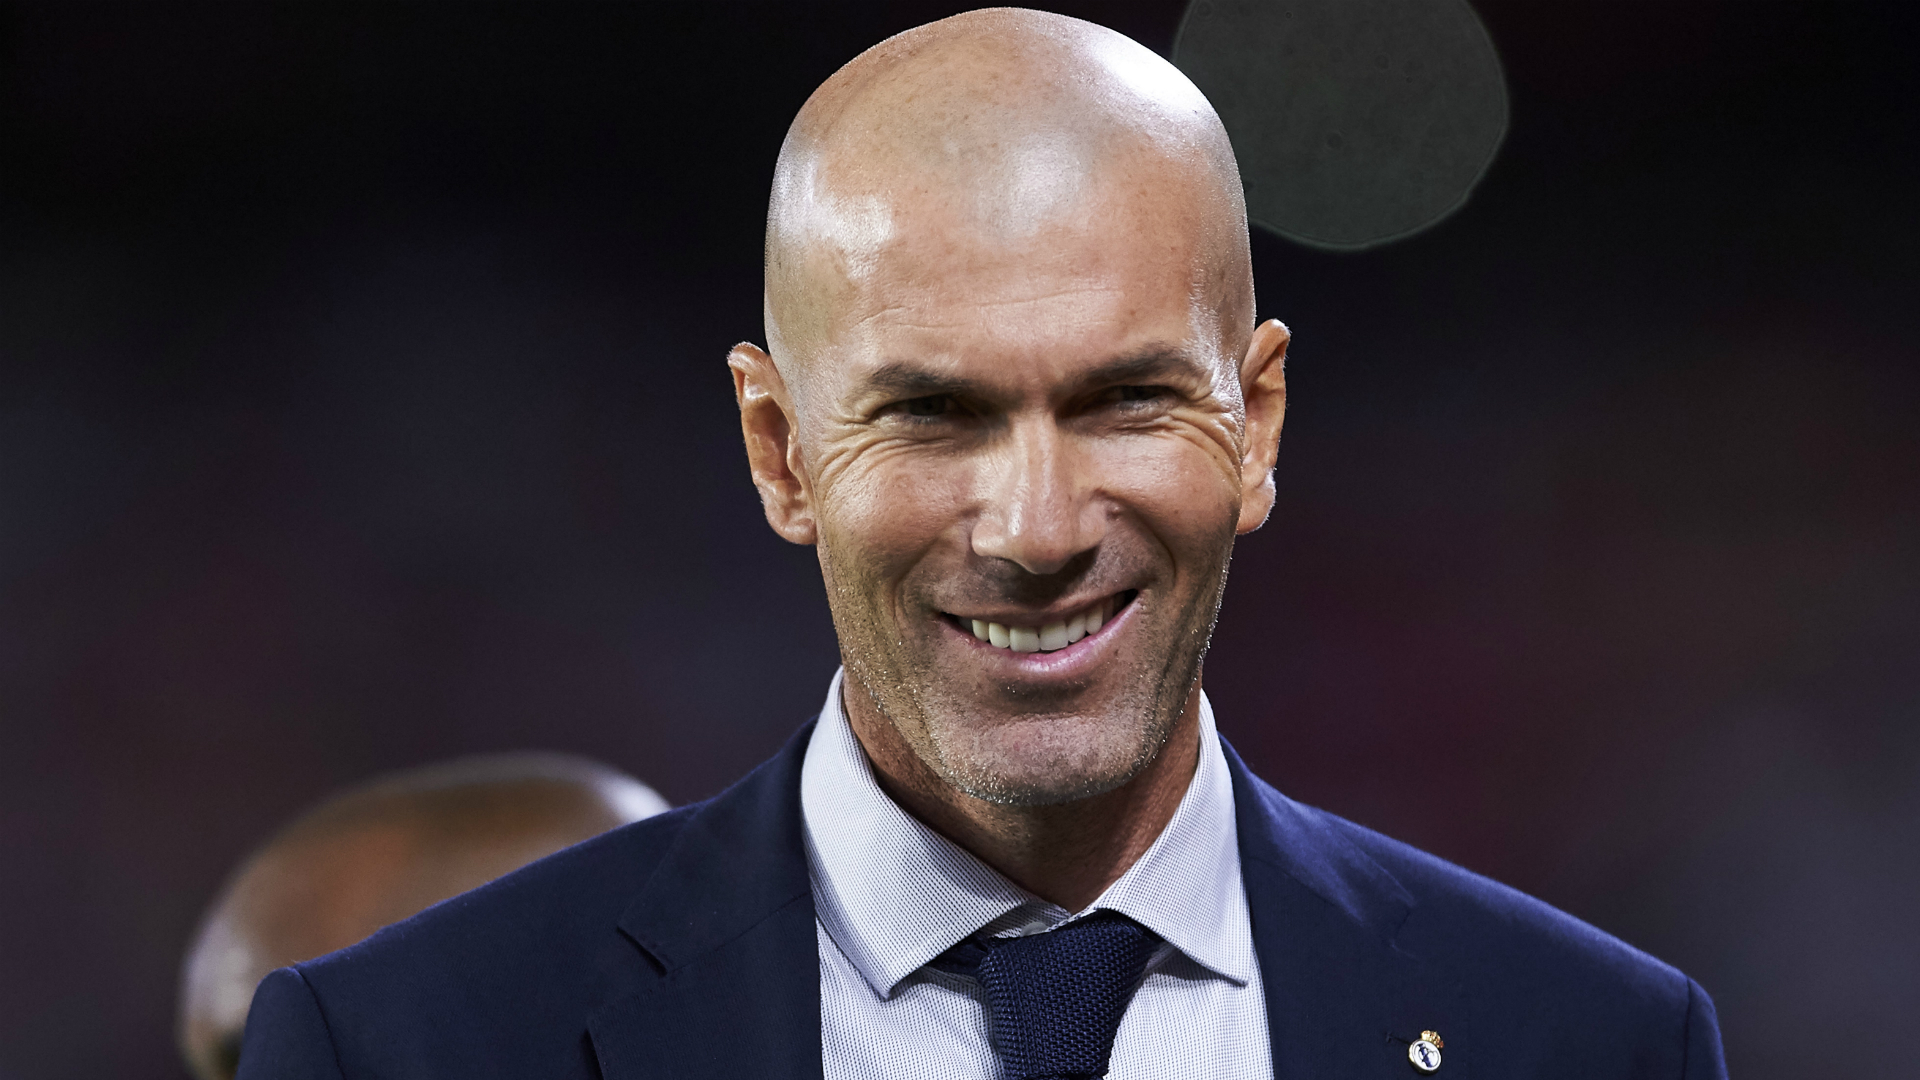 Noel Le Graet wants Zinedine Zidane to replace Didier Deschamps at some point - potentially after the 2022 World Cup.